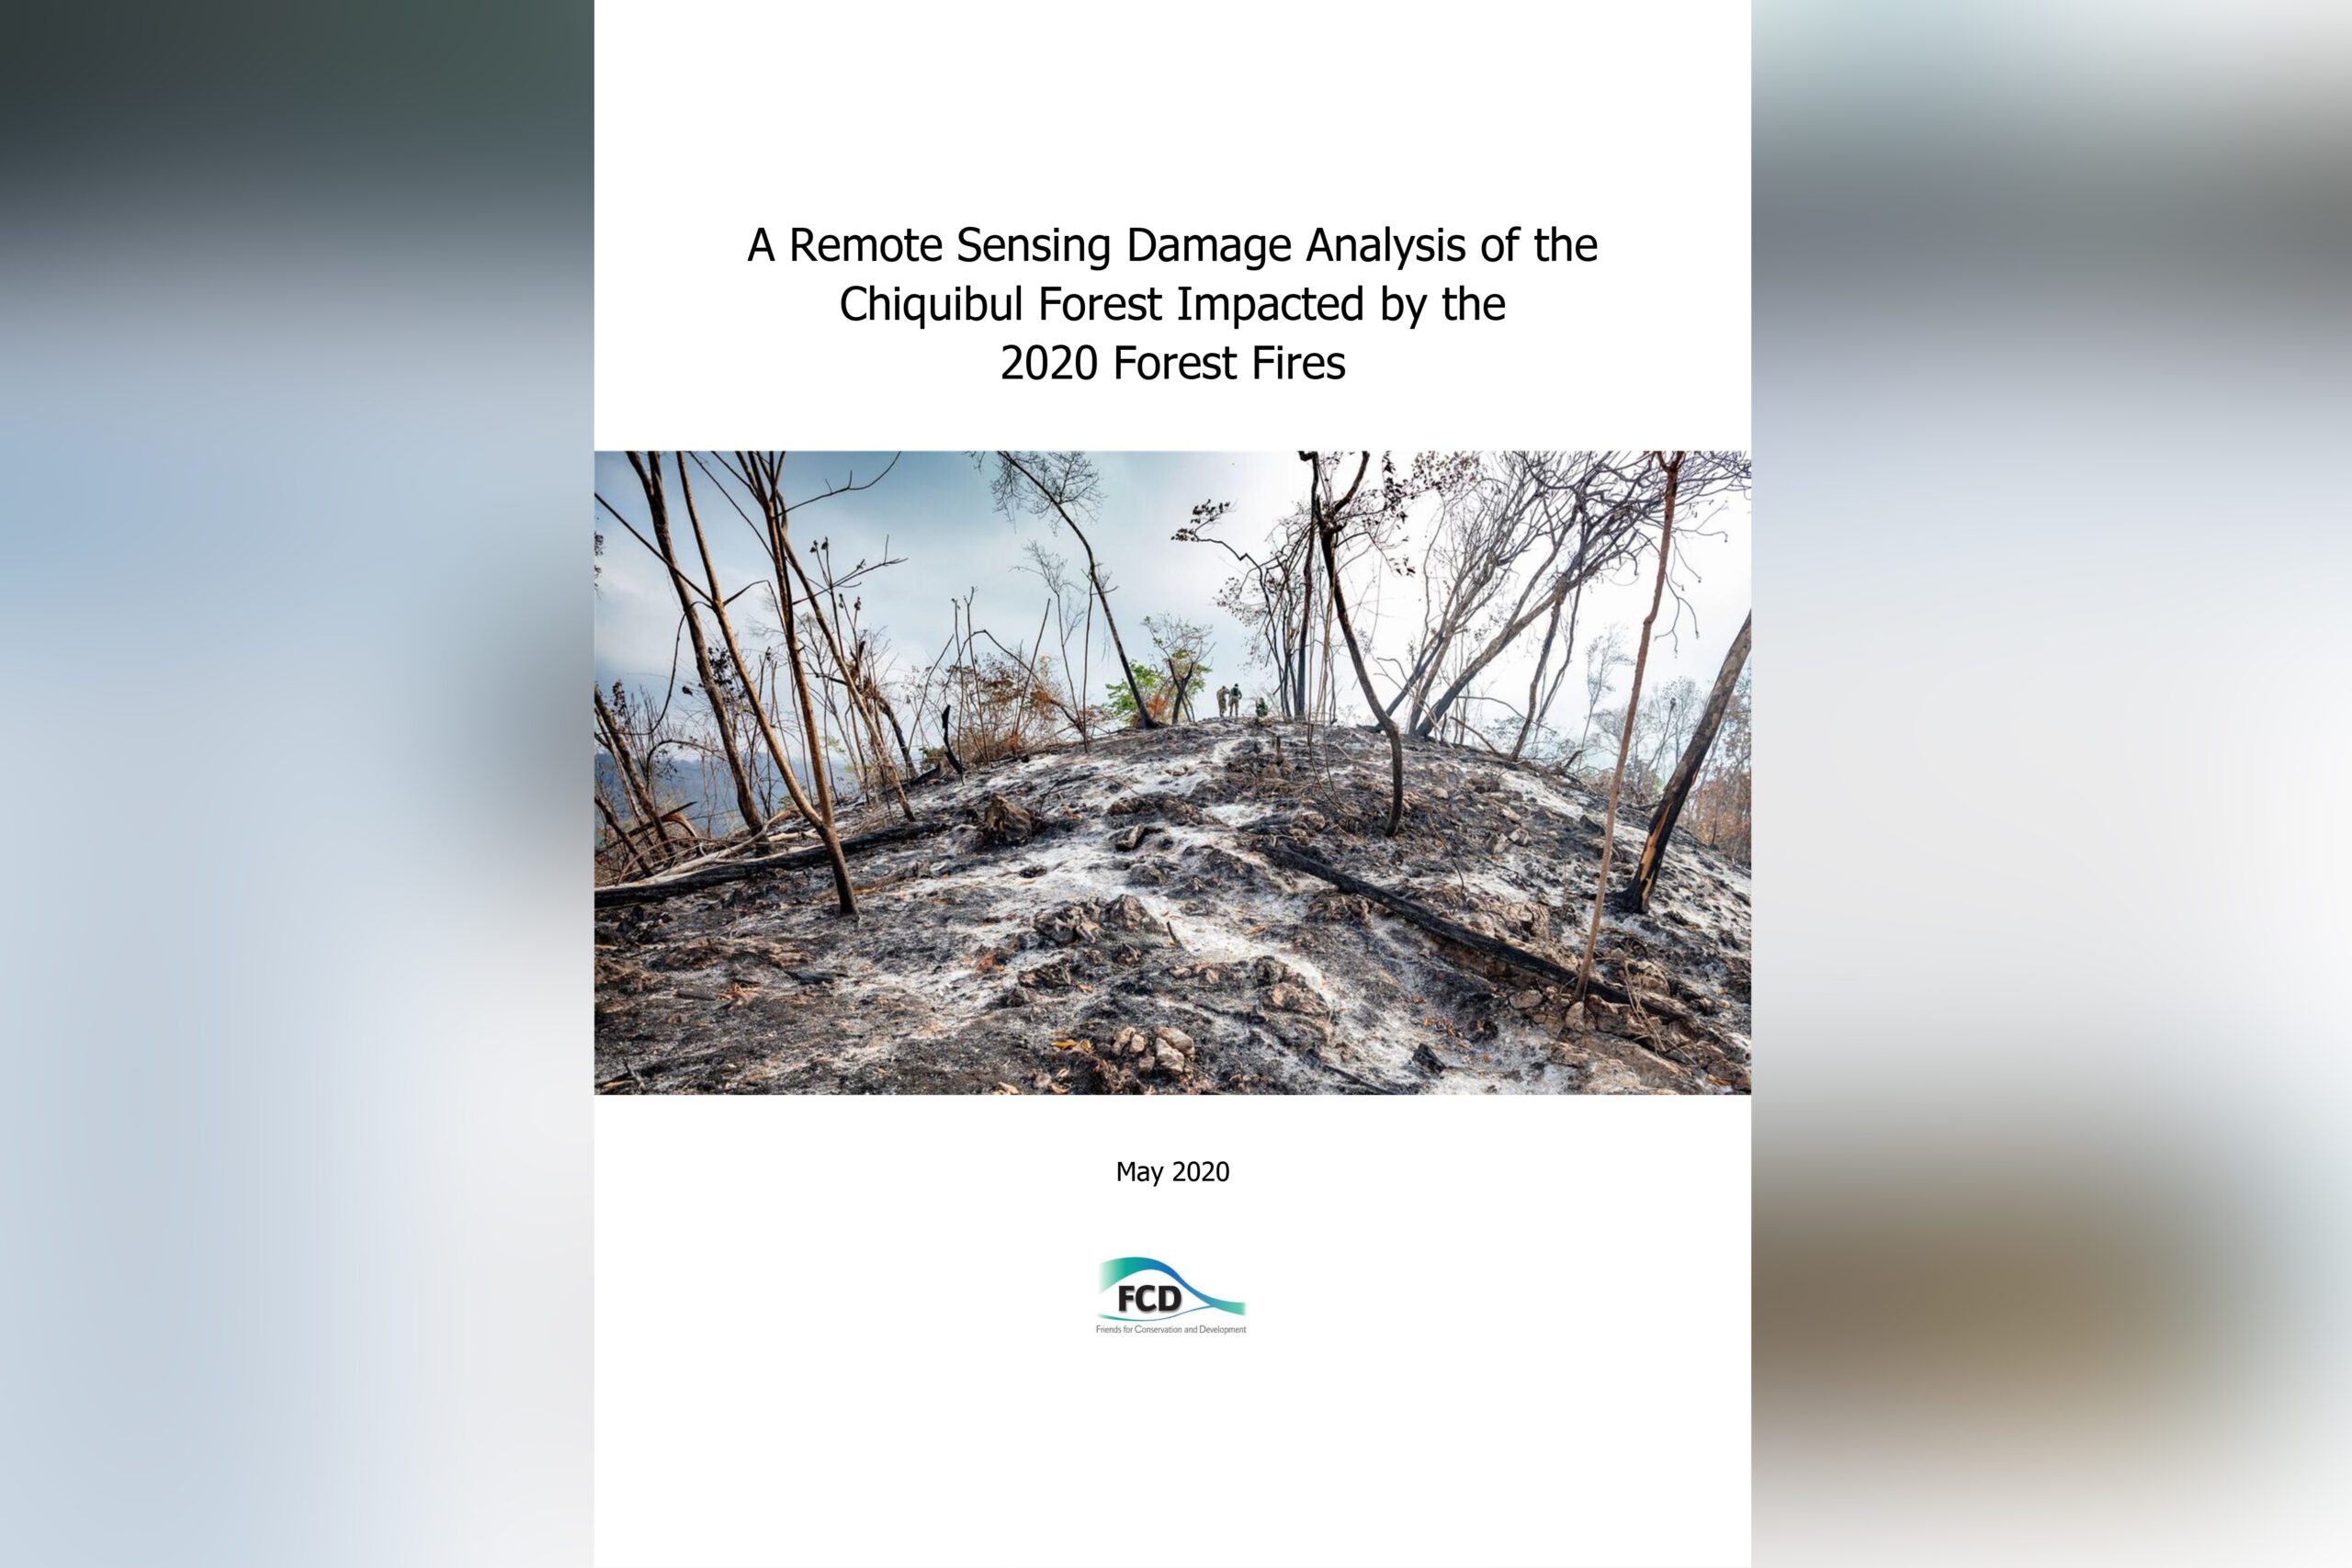 A Remote Sensing Damage Analysis of the Chiquibul Forest Impacted by the 2020 Forest Fires